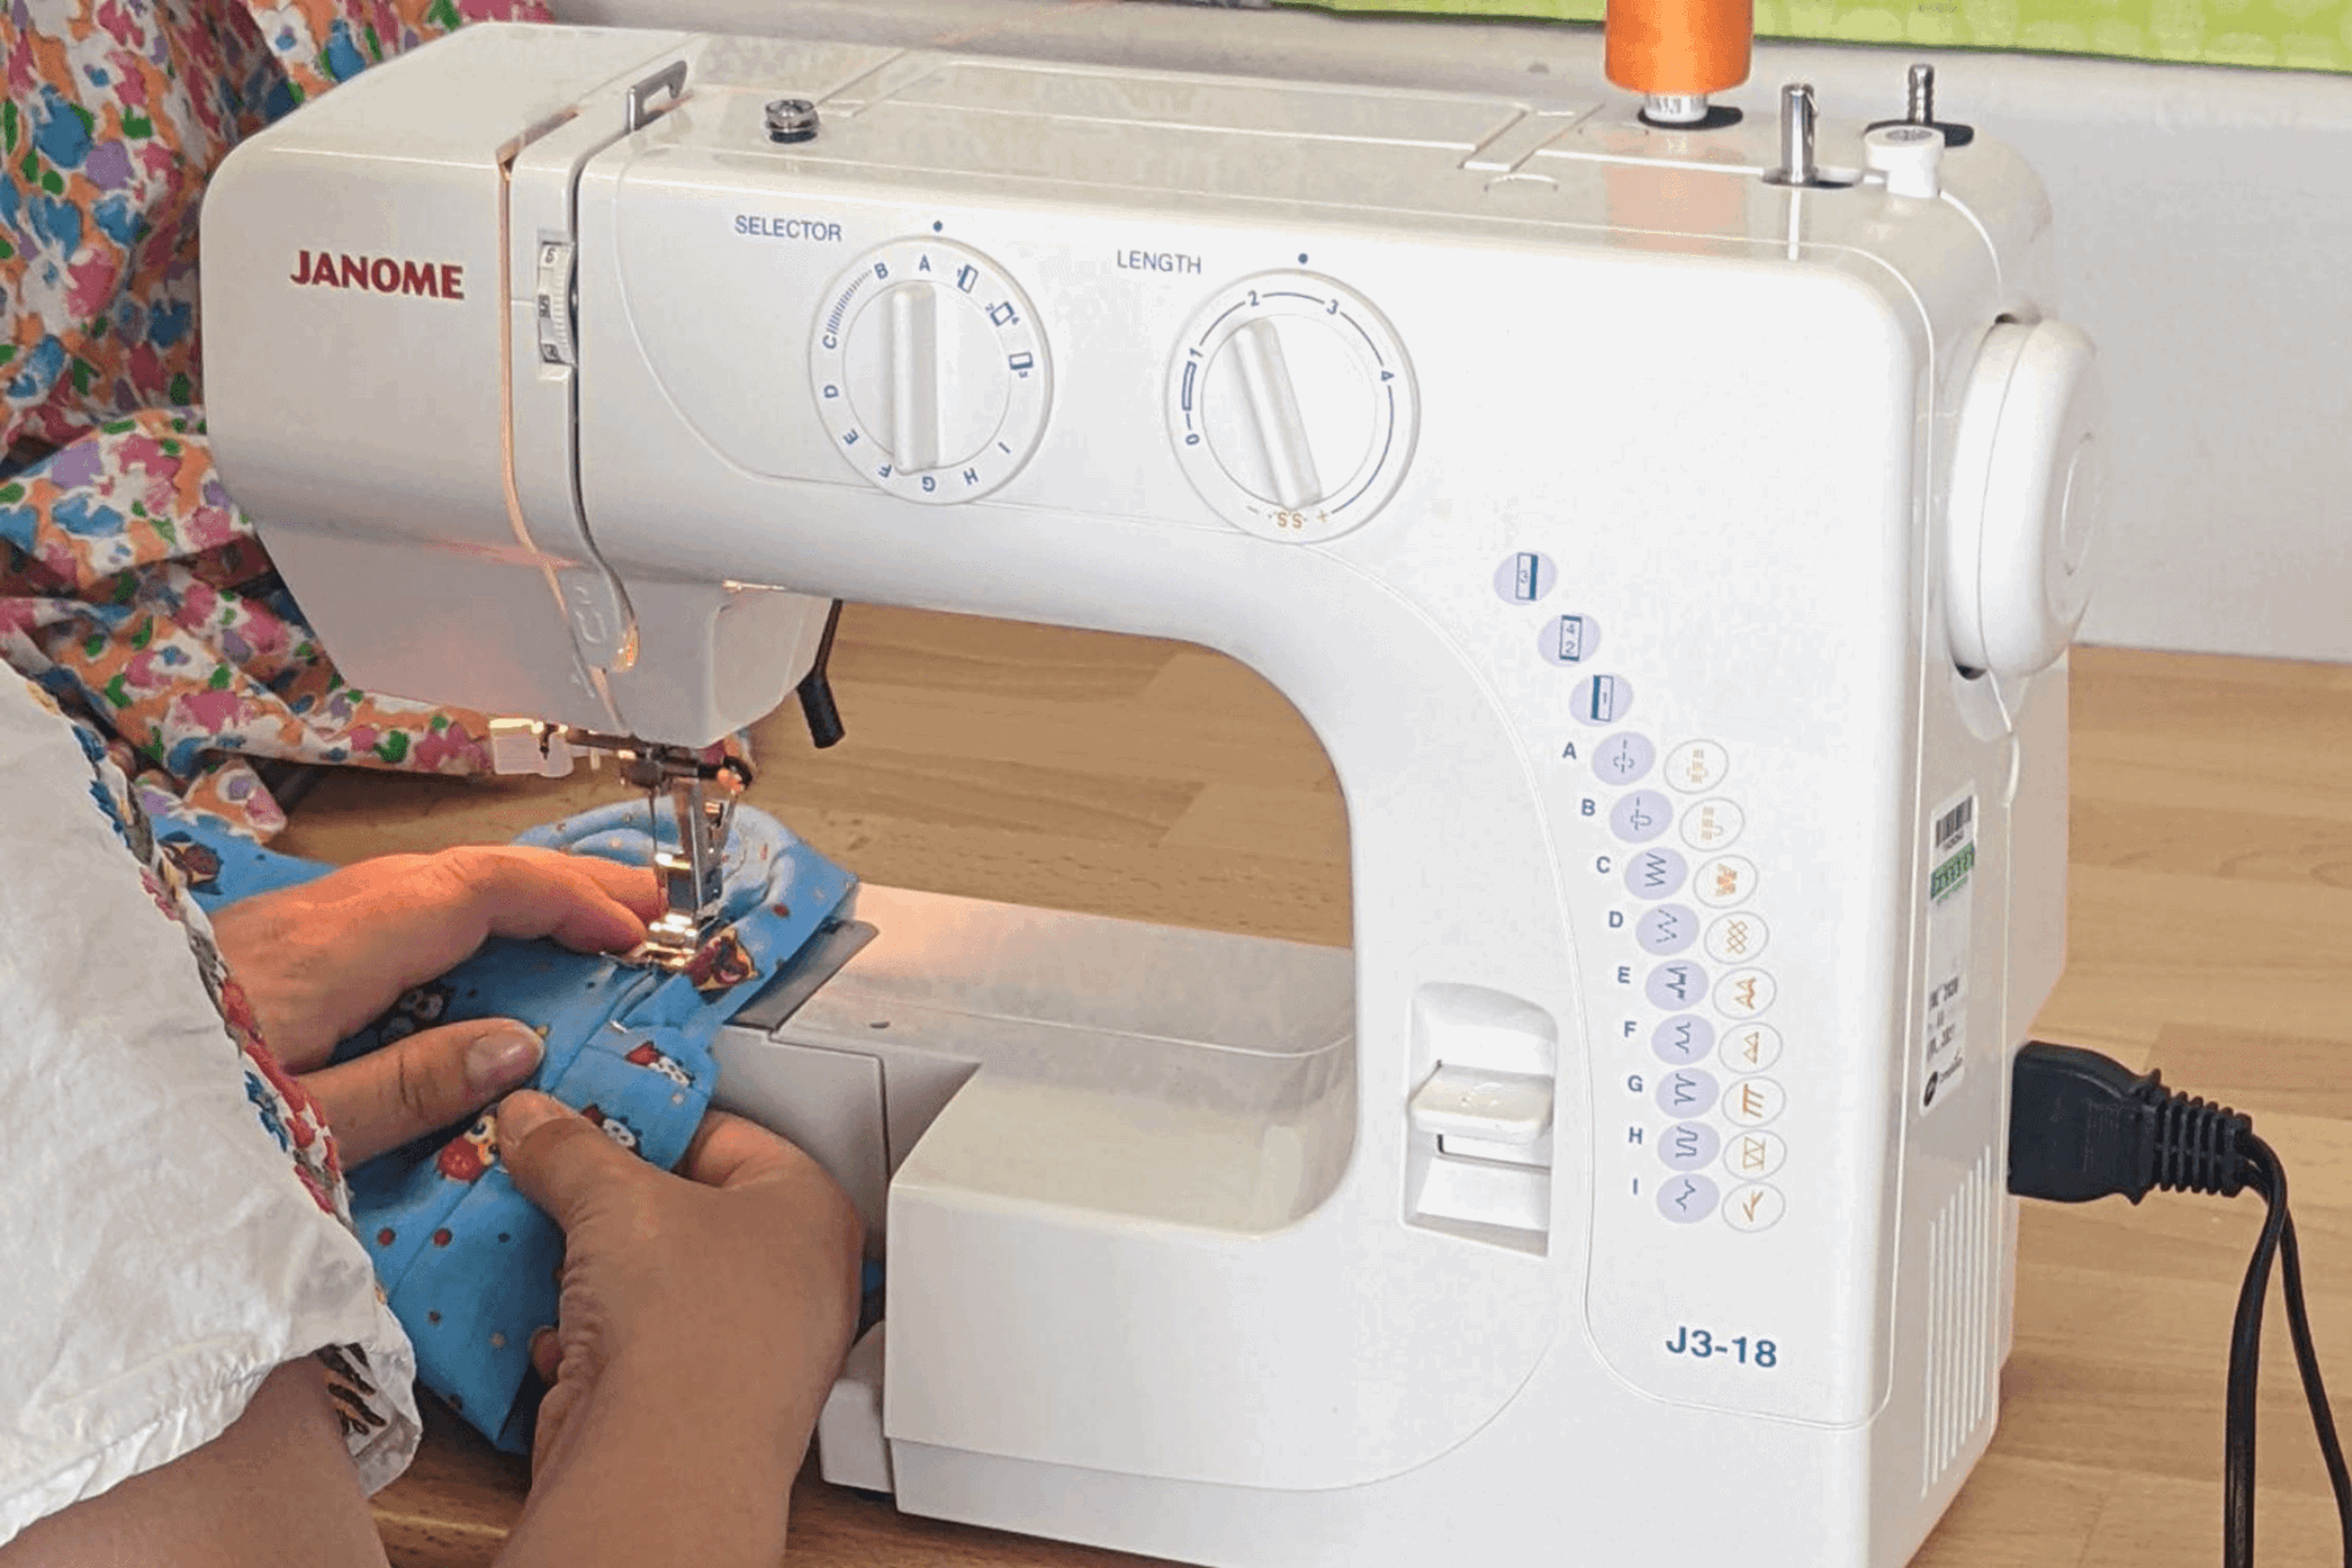 Sewing on a machine